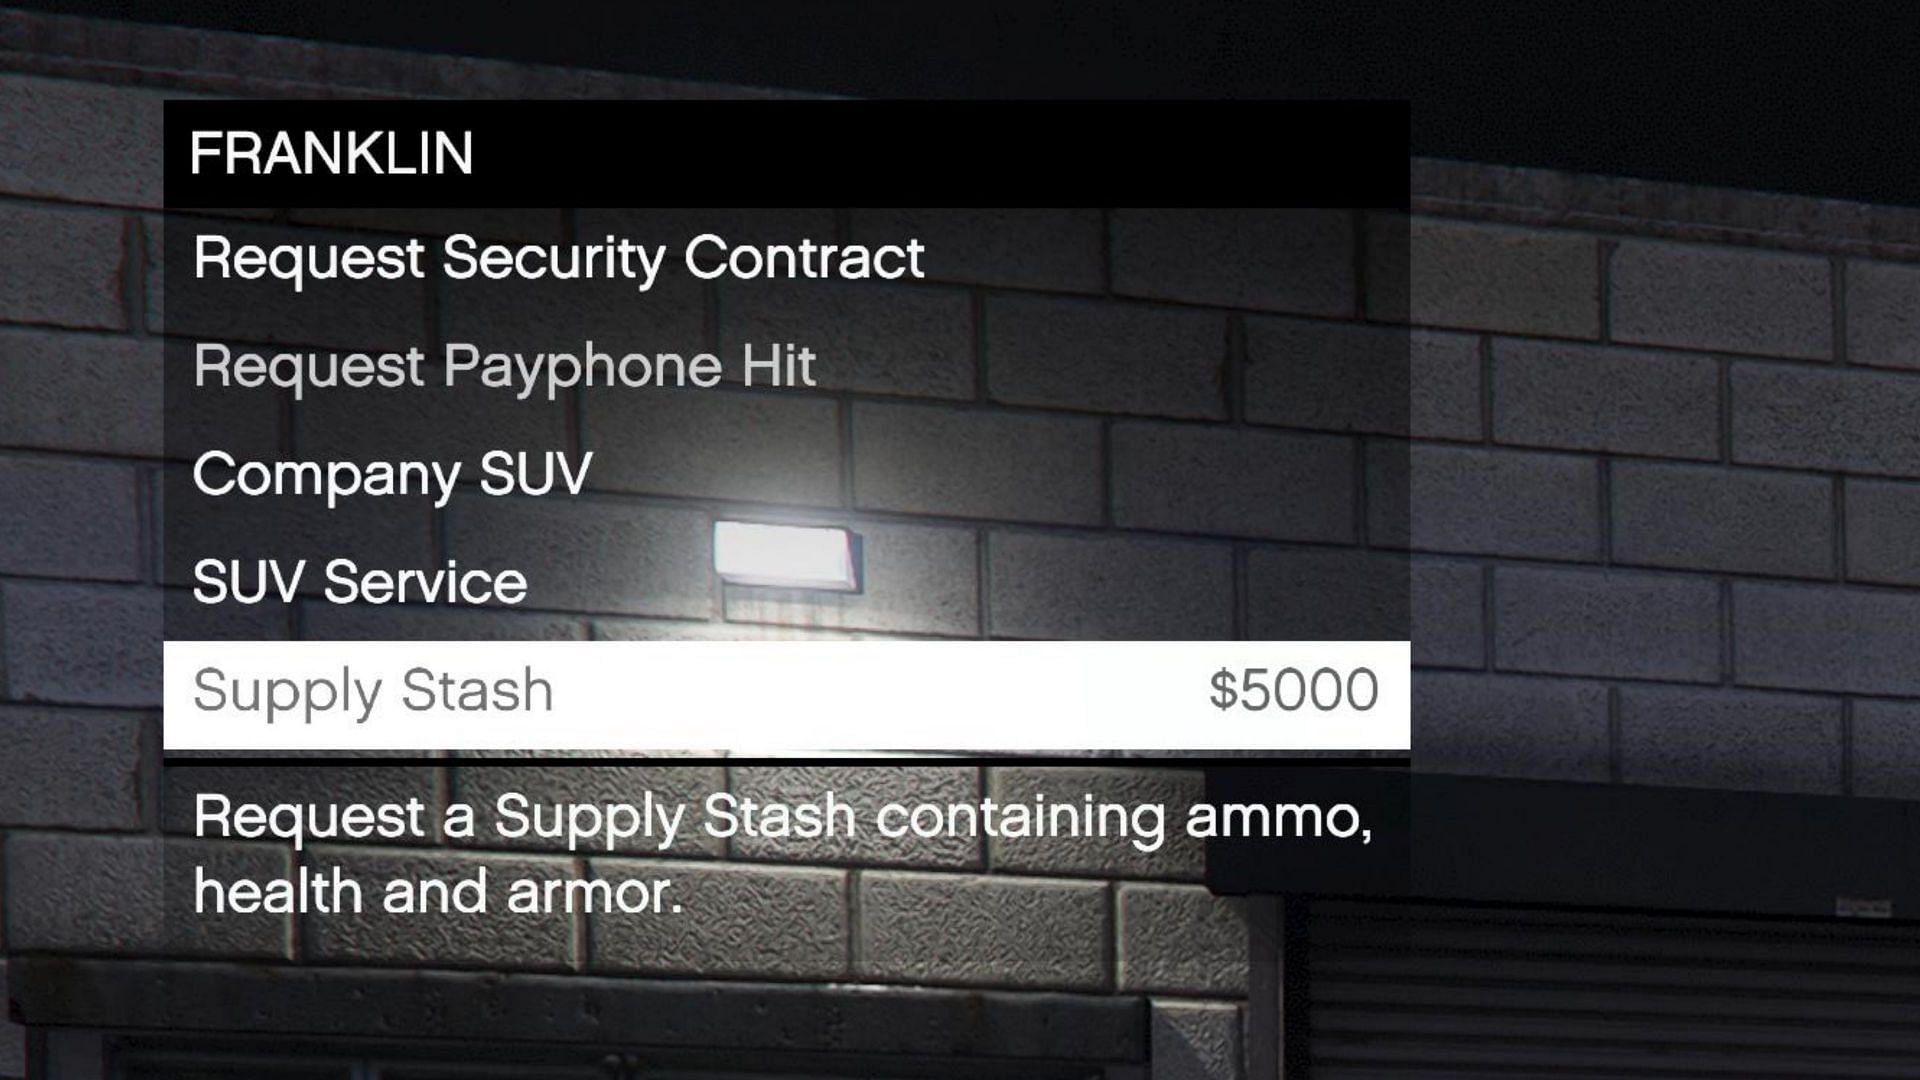 Call Franklin to see these options (Image via Rockstar Games)